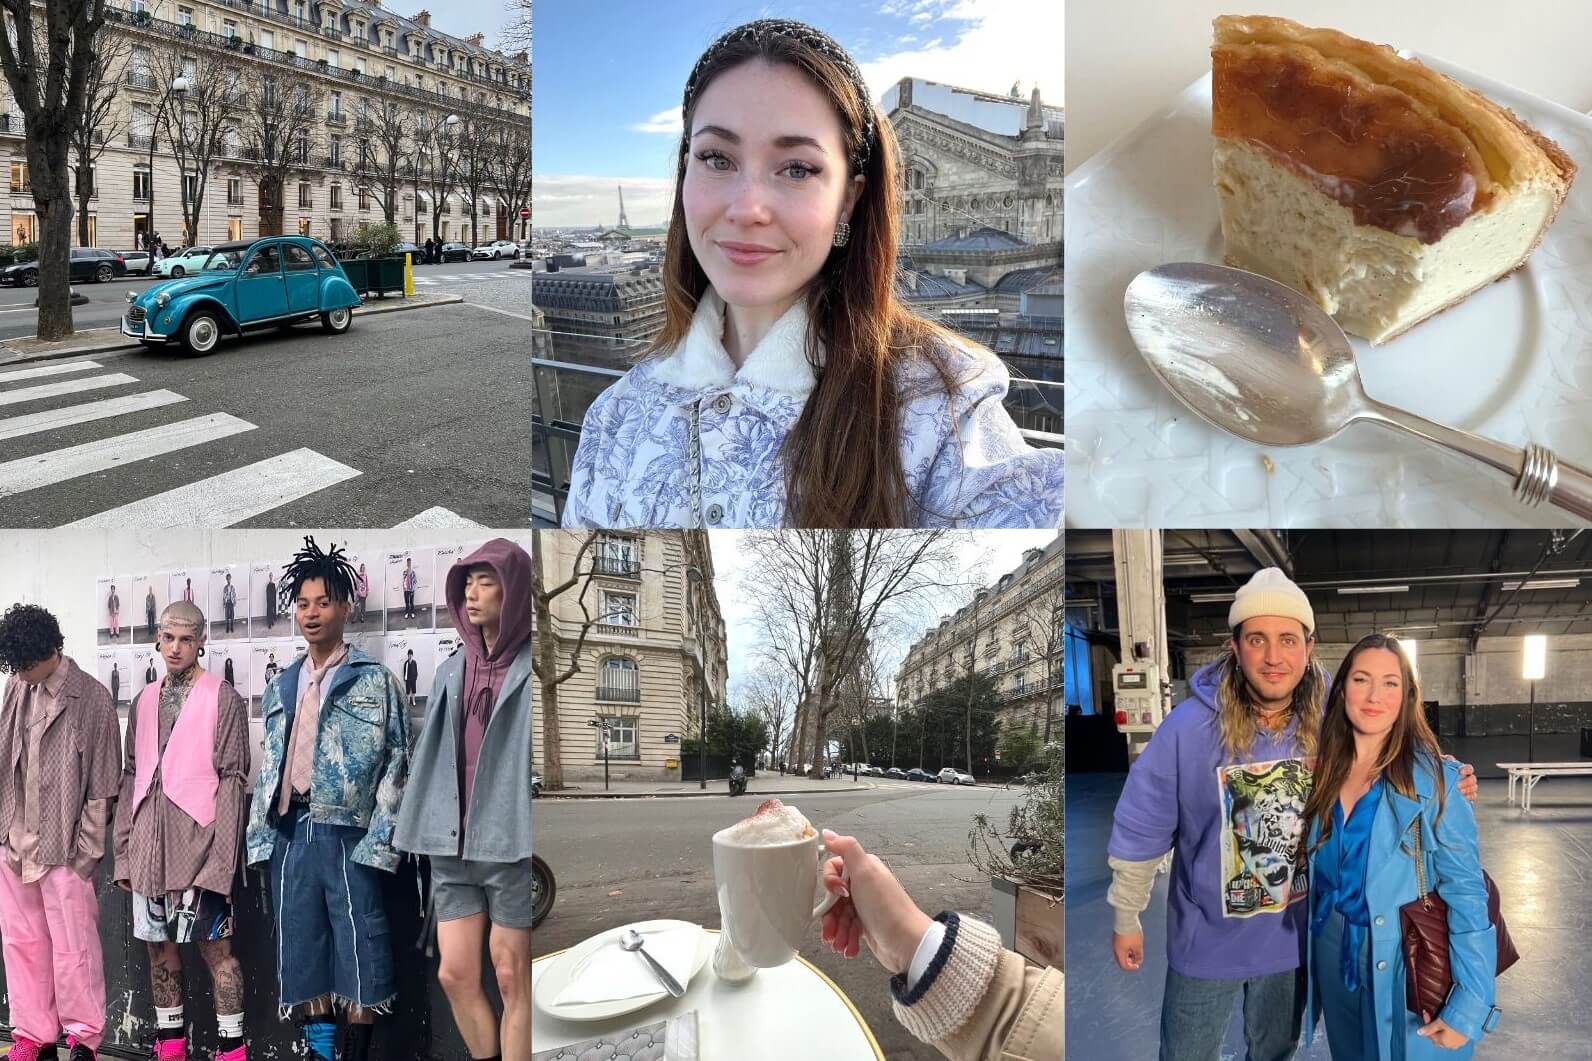 A collage capturing the essence of Parisian life: vintage cars, street fashion, local cuisine, and leisure moments in the city of lights.